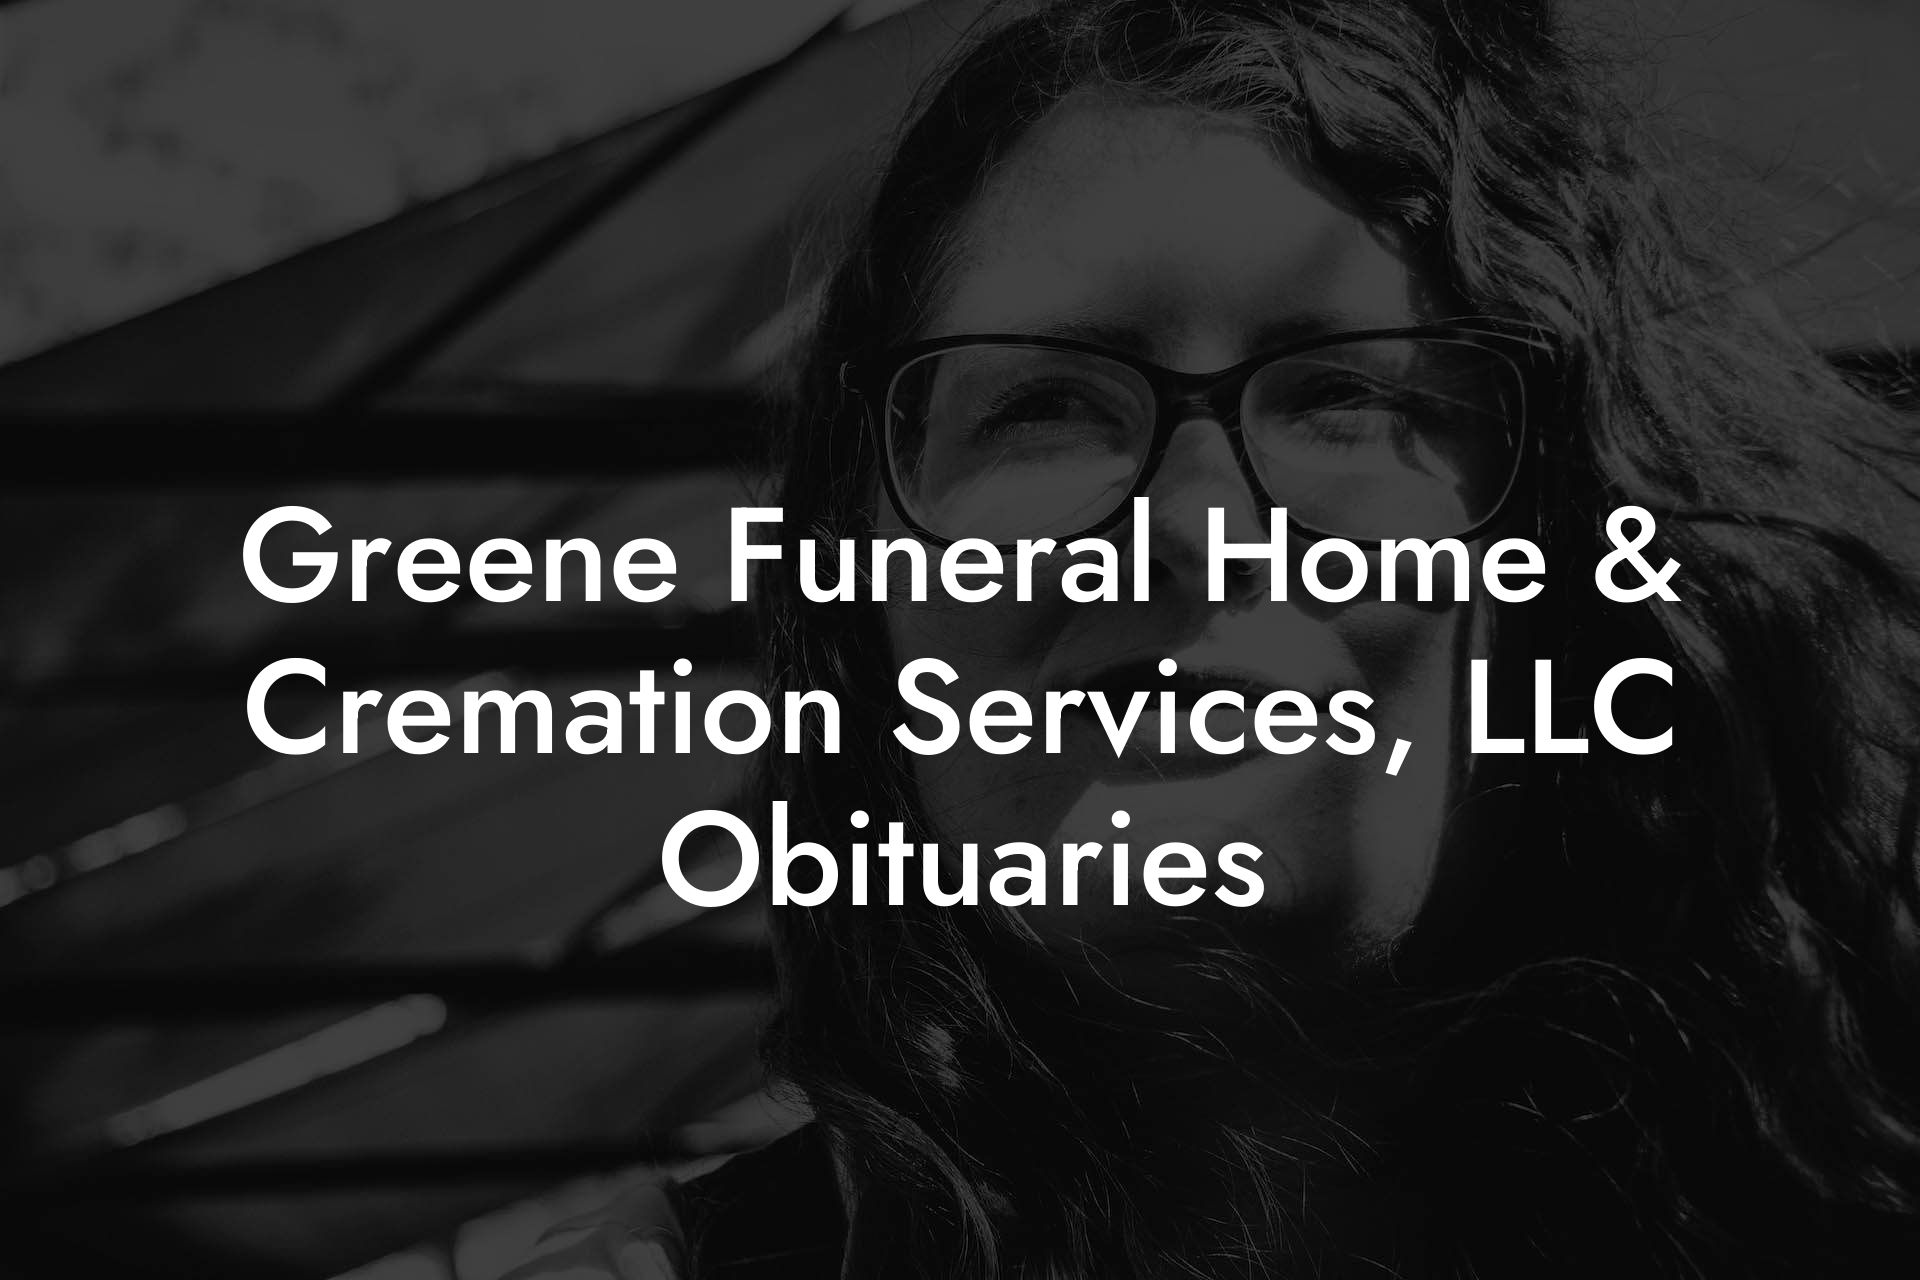 Greene Funeral Home & Cremation Services, LLC Obituaries